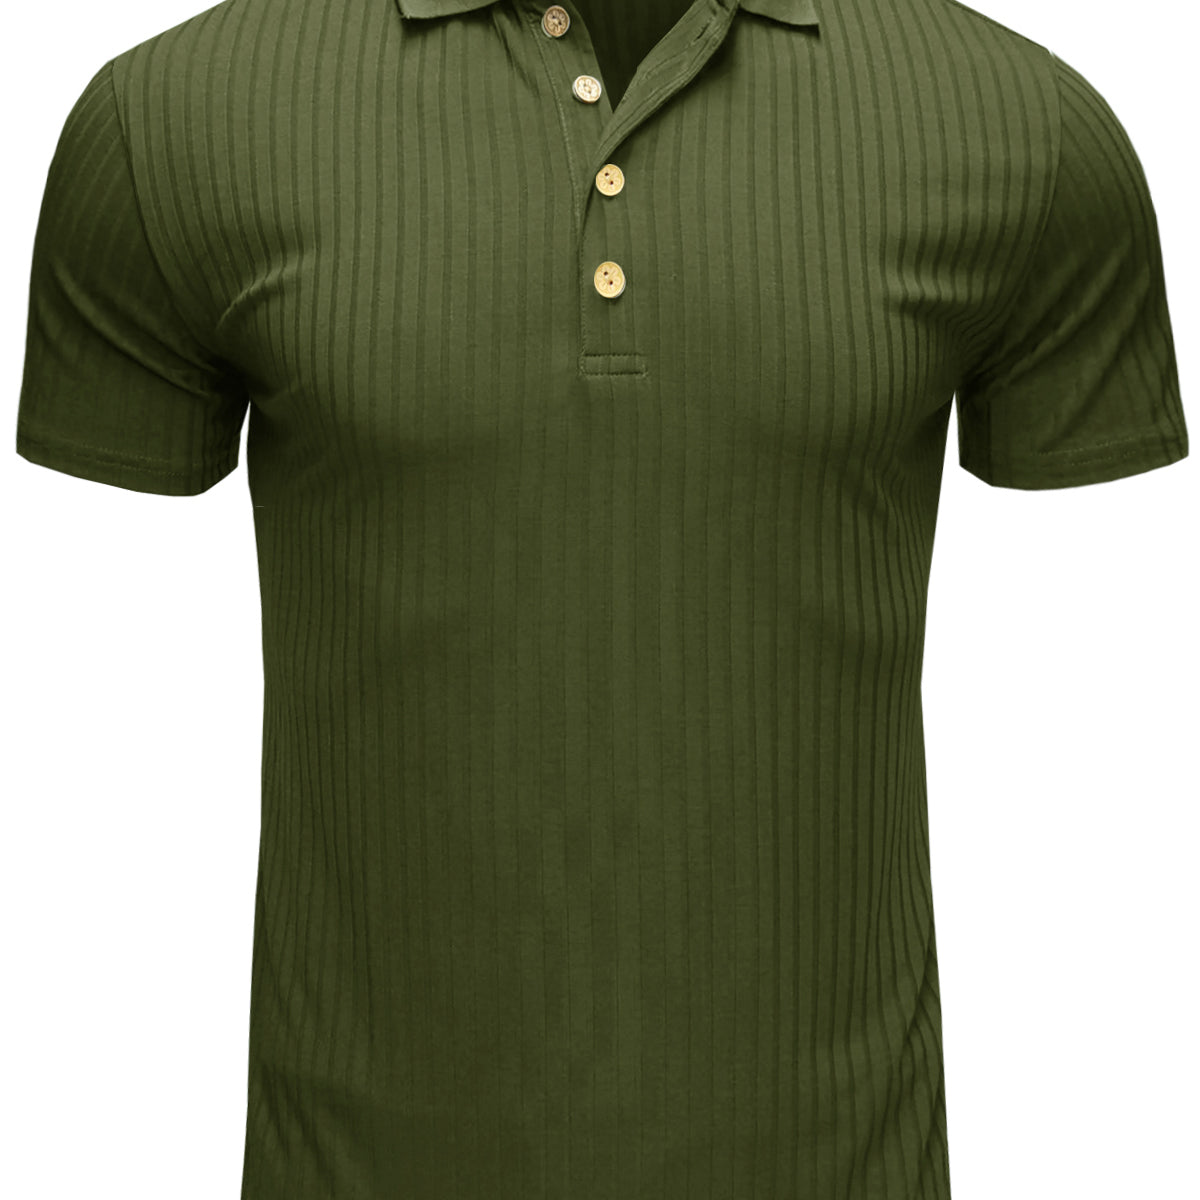 Men's Casual Solid Color Short Sleeve Polo Shirt